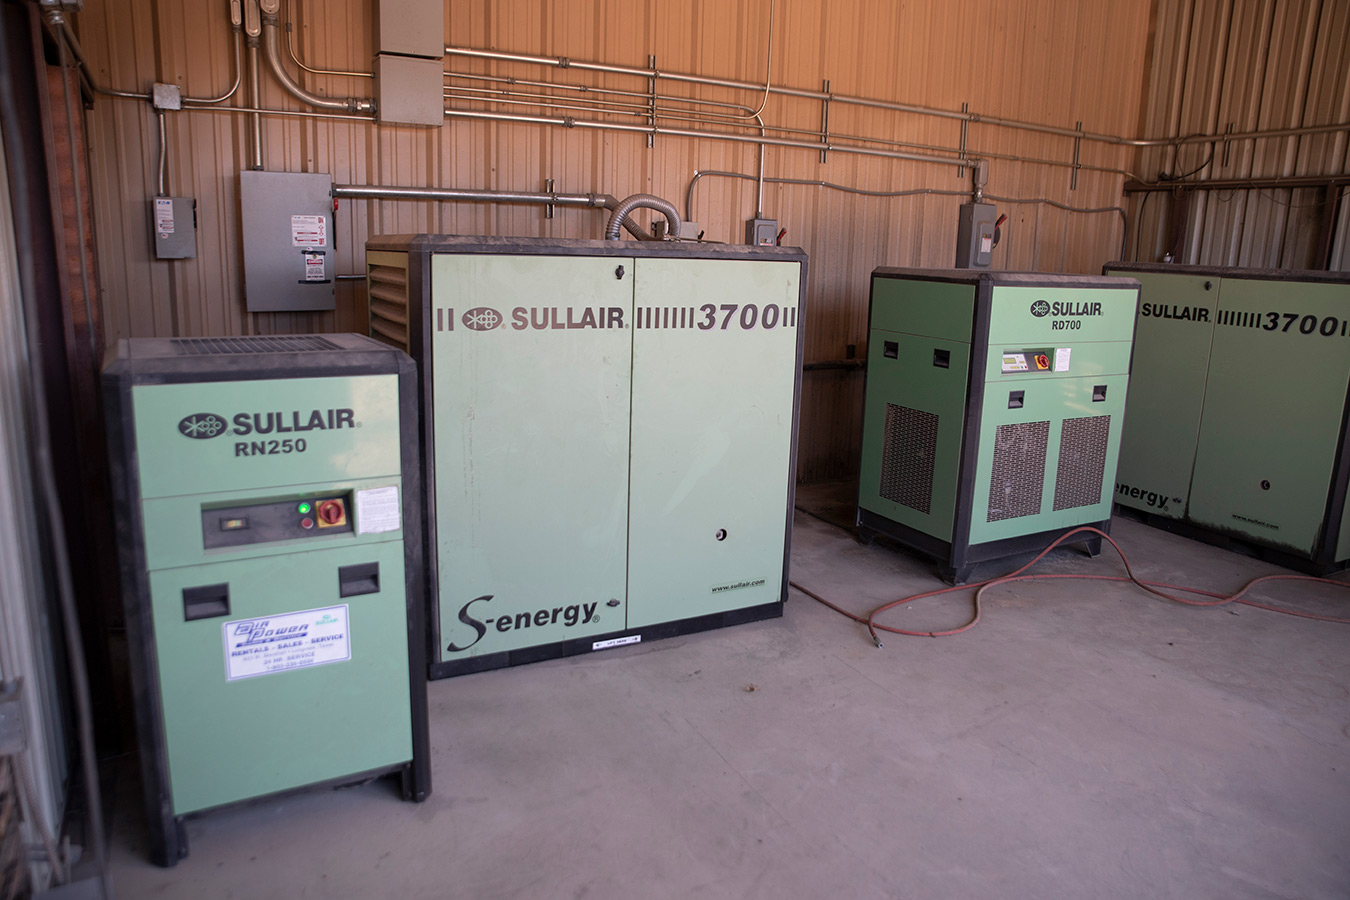 Sullair S-energy 3700 compressors with RN250 and RD700 refrigerated compressed air dryers